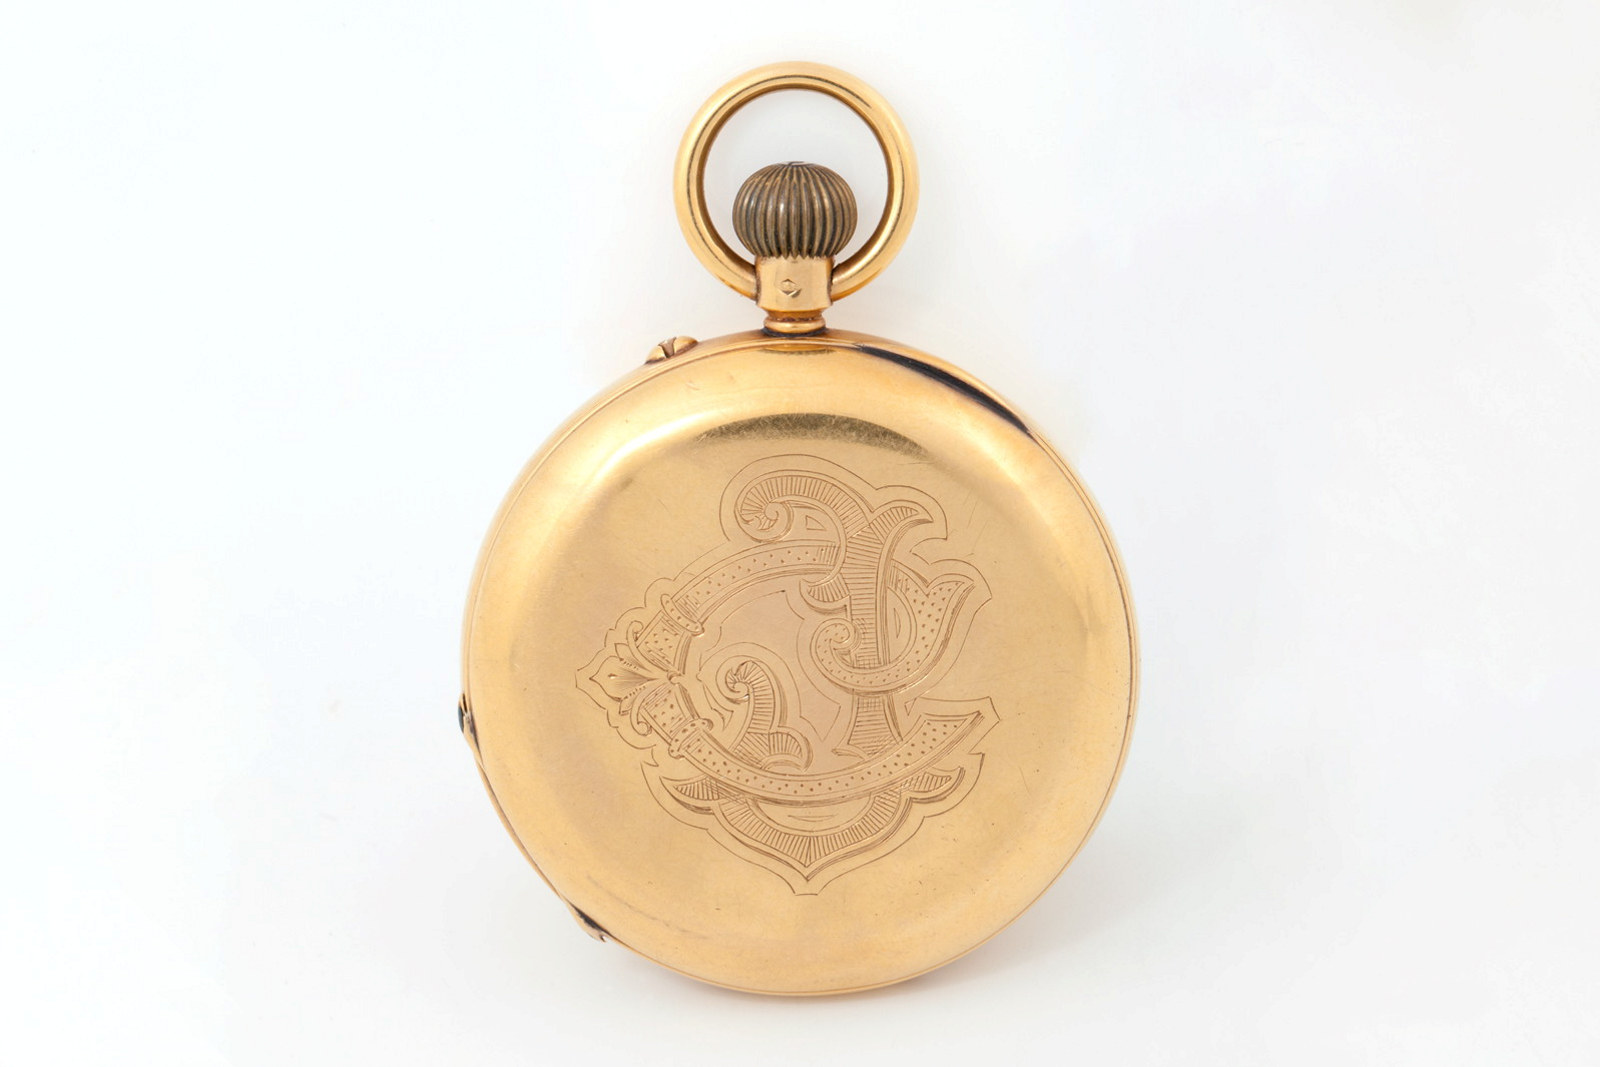 Back of a gold pocket watch presented to magistrate Charles Jennings on his retirement, 26 November 1926